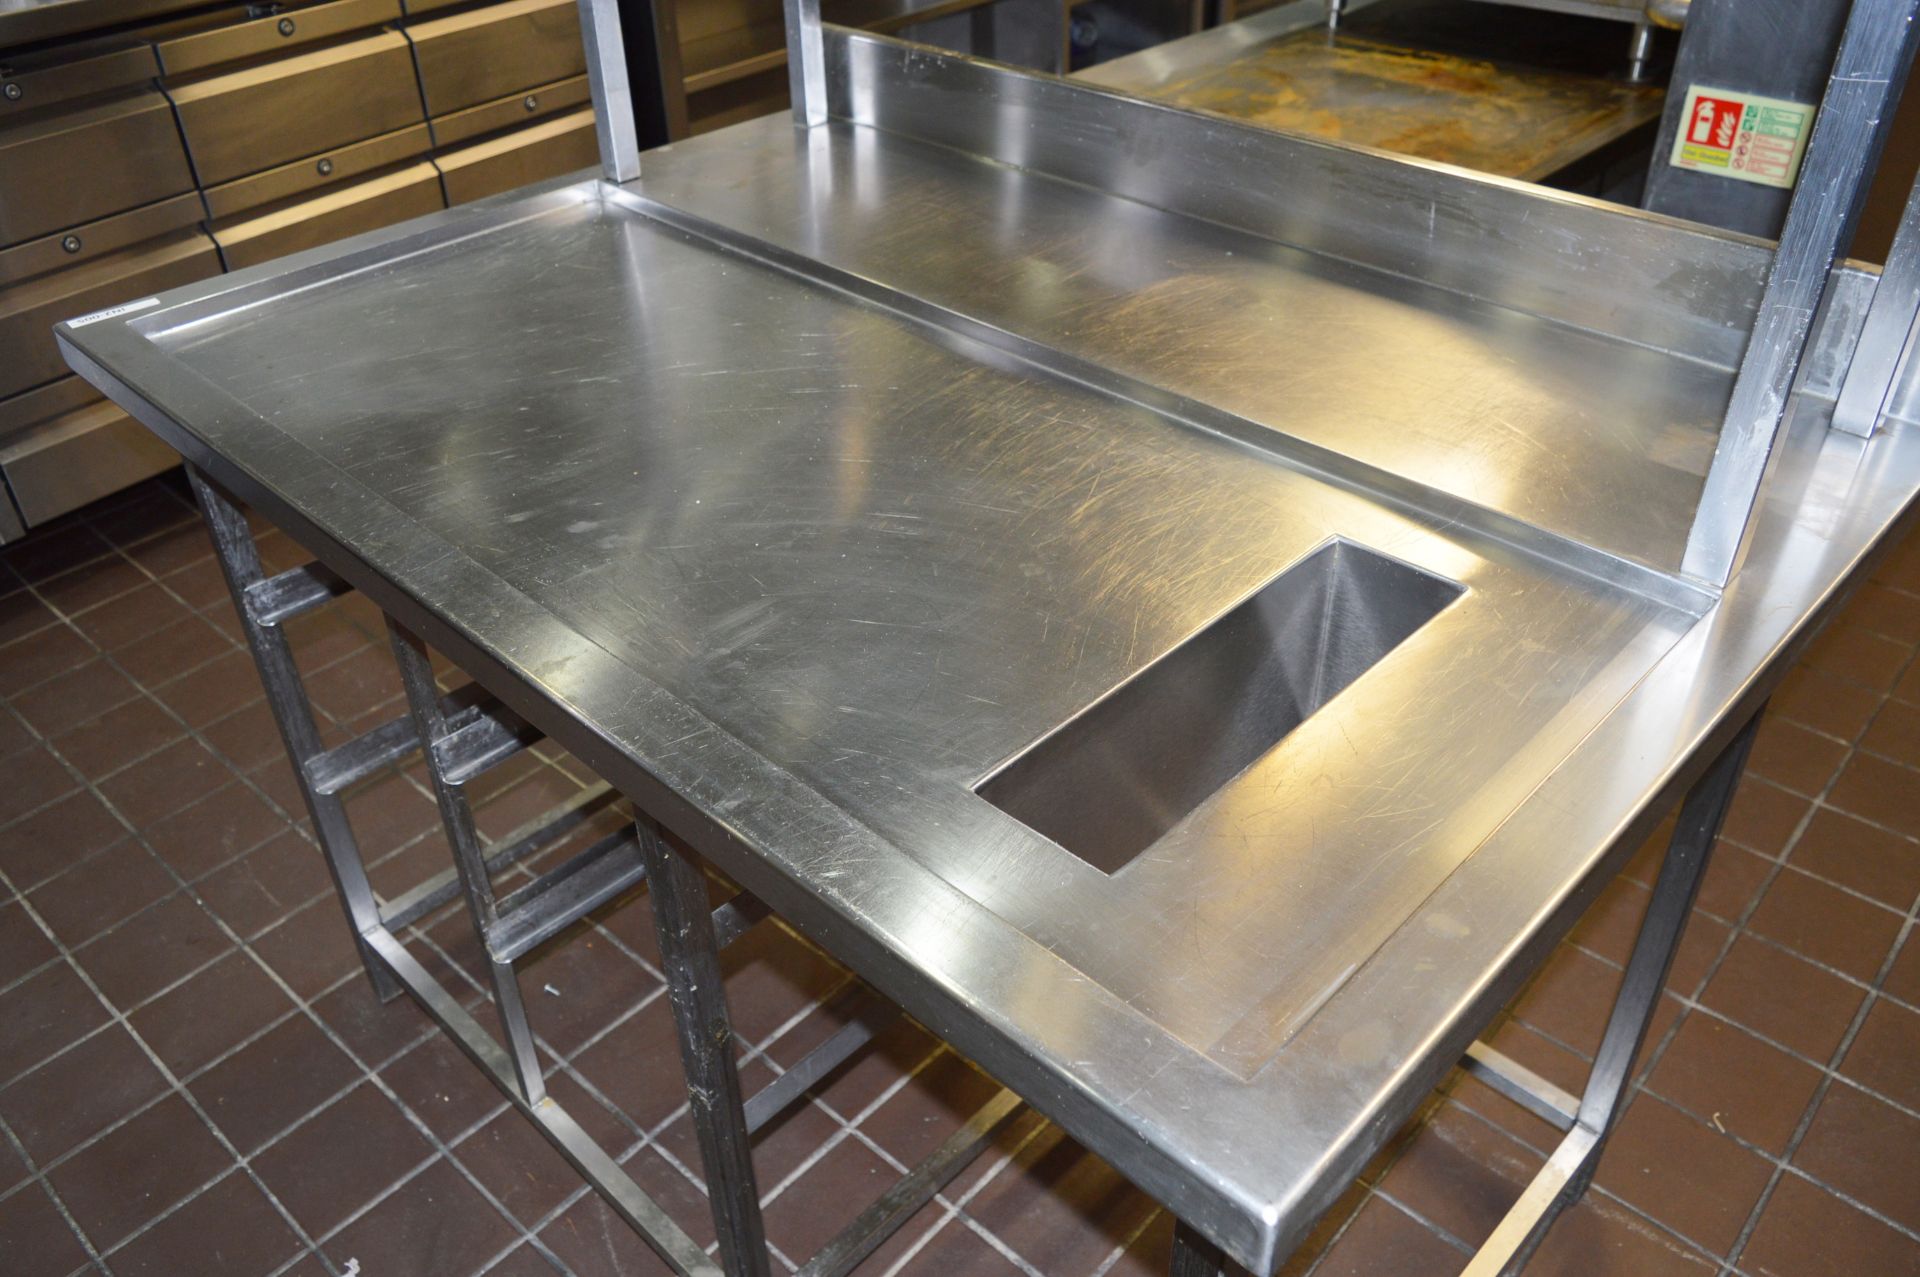 1 x Stainless Steel Prep Bench With Undercounter Shelves, Bin Chute and Overhead Shelves - H87/171 x - Image 2 of 5